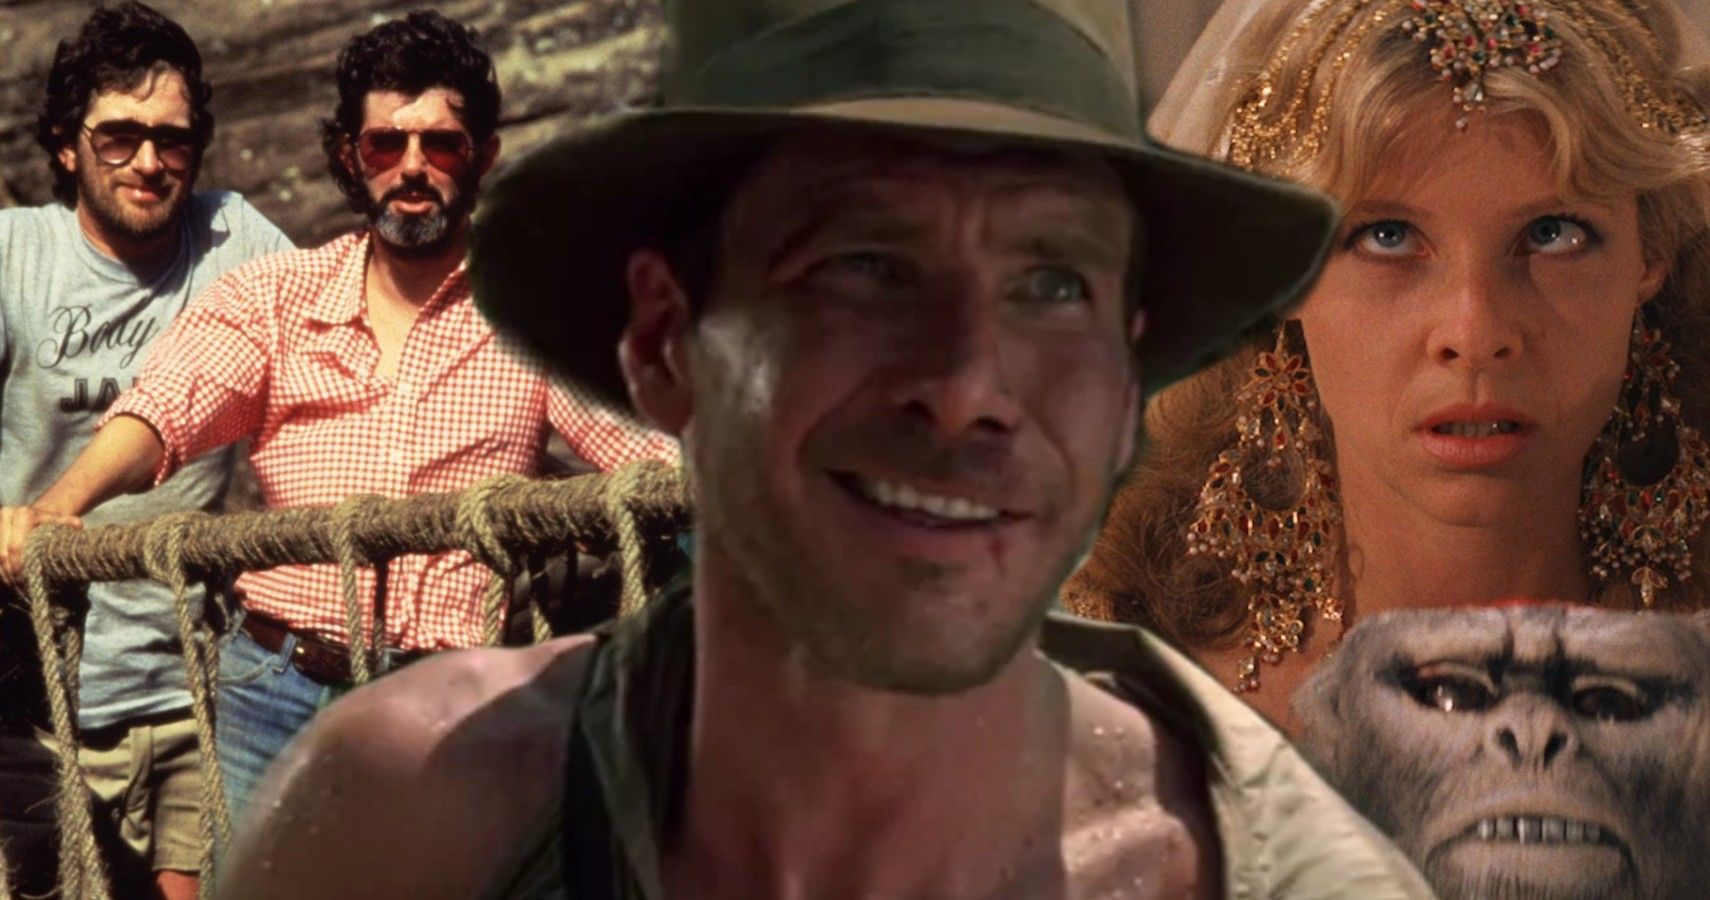 Indiana Jones: 10 Behind-The-Scenes Facts About Temple Of Doom